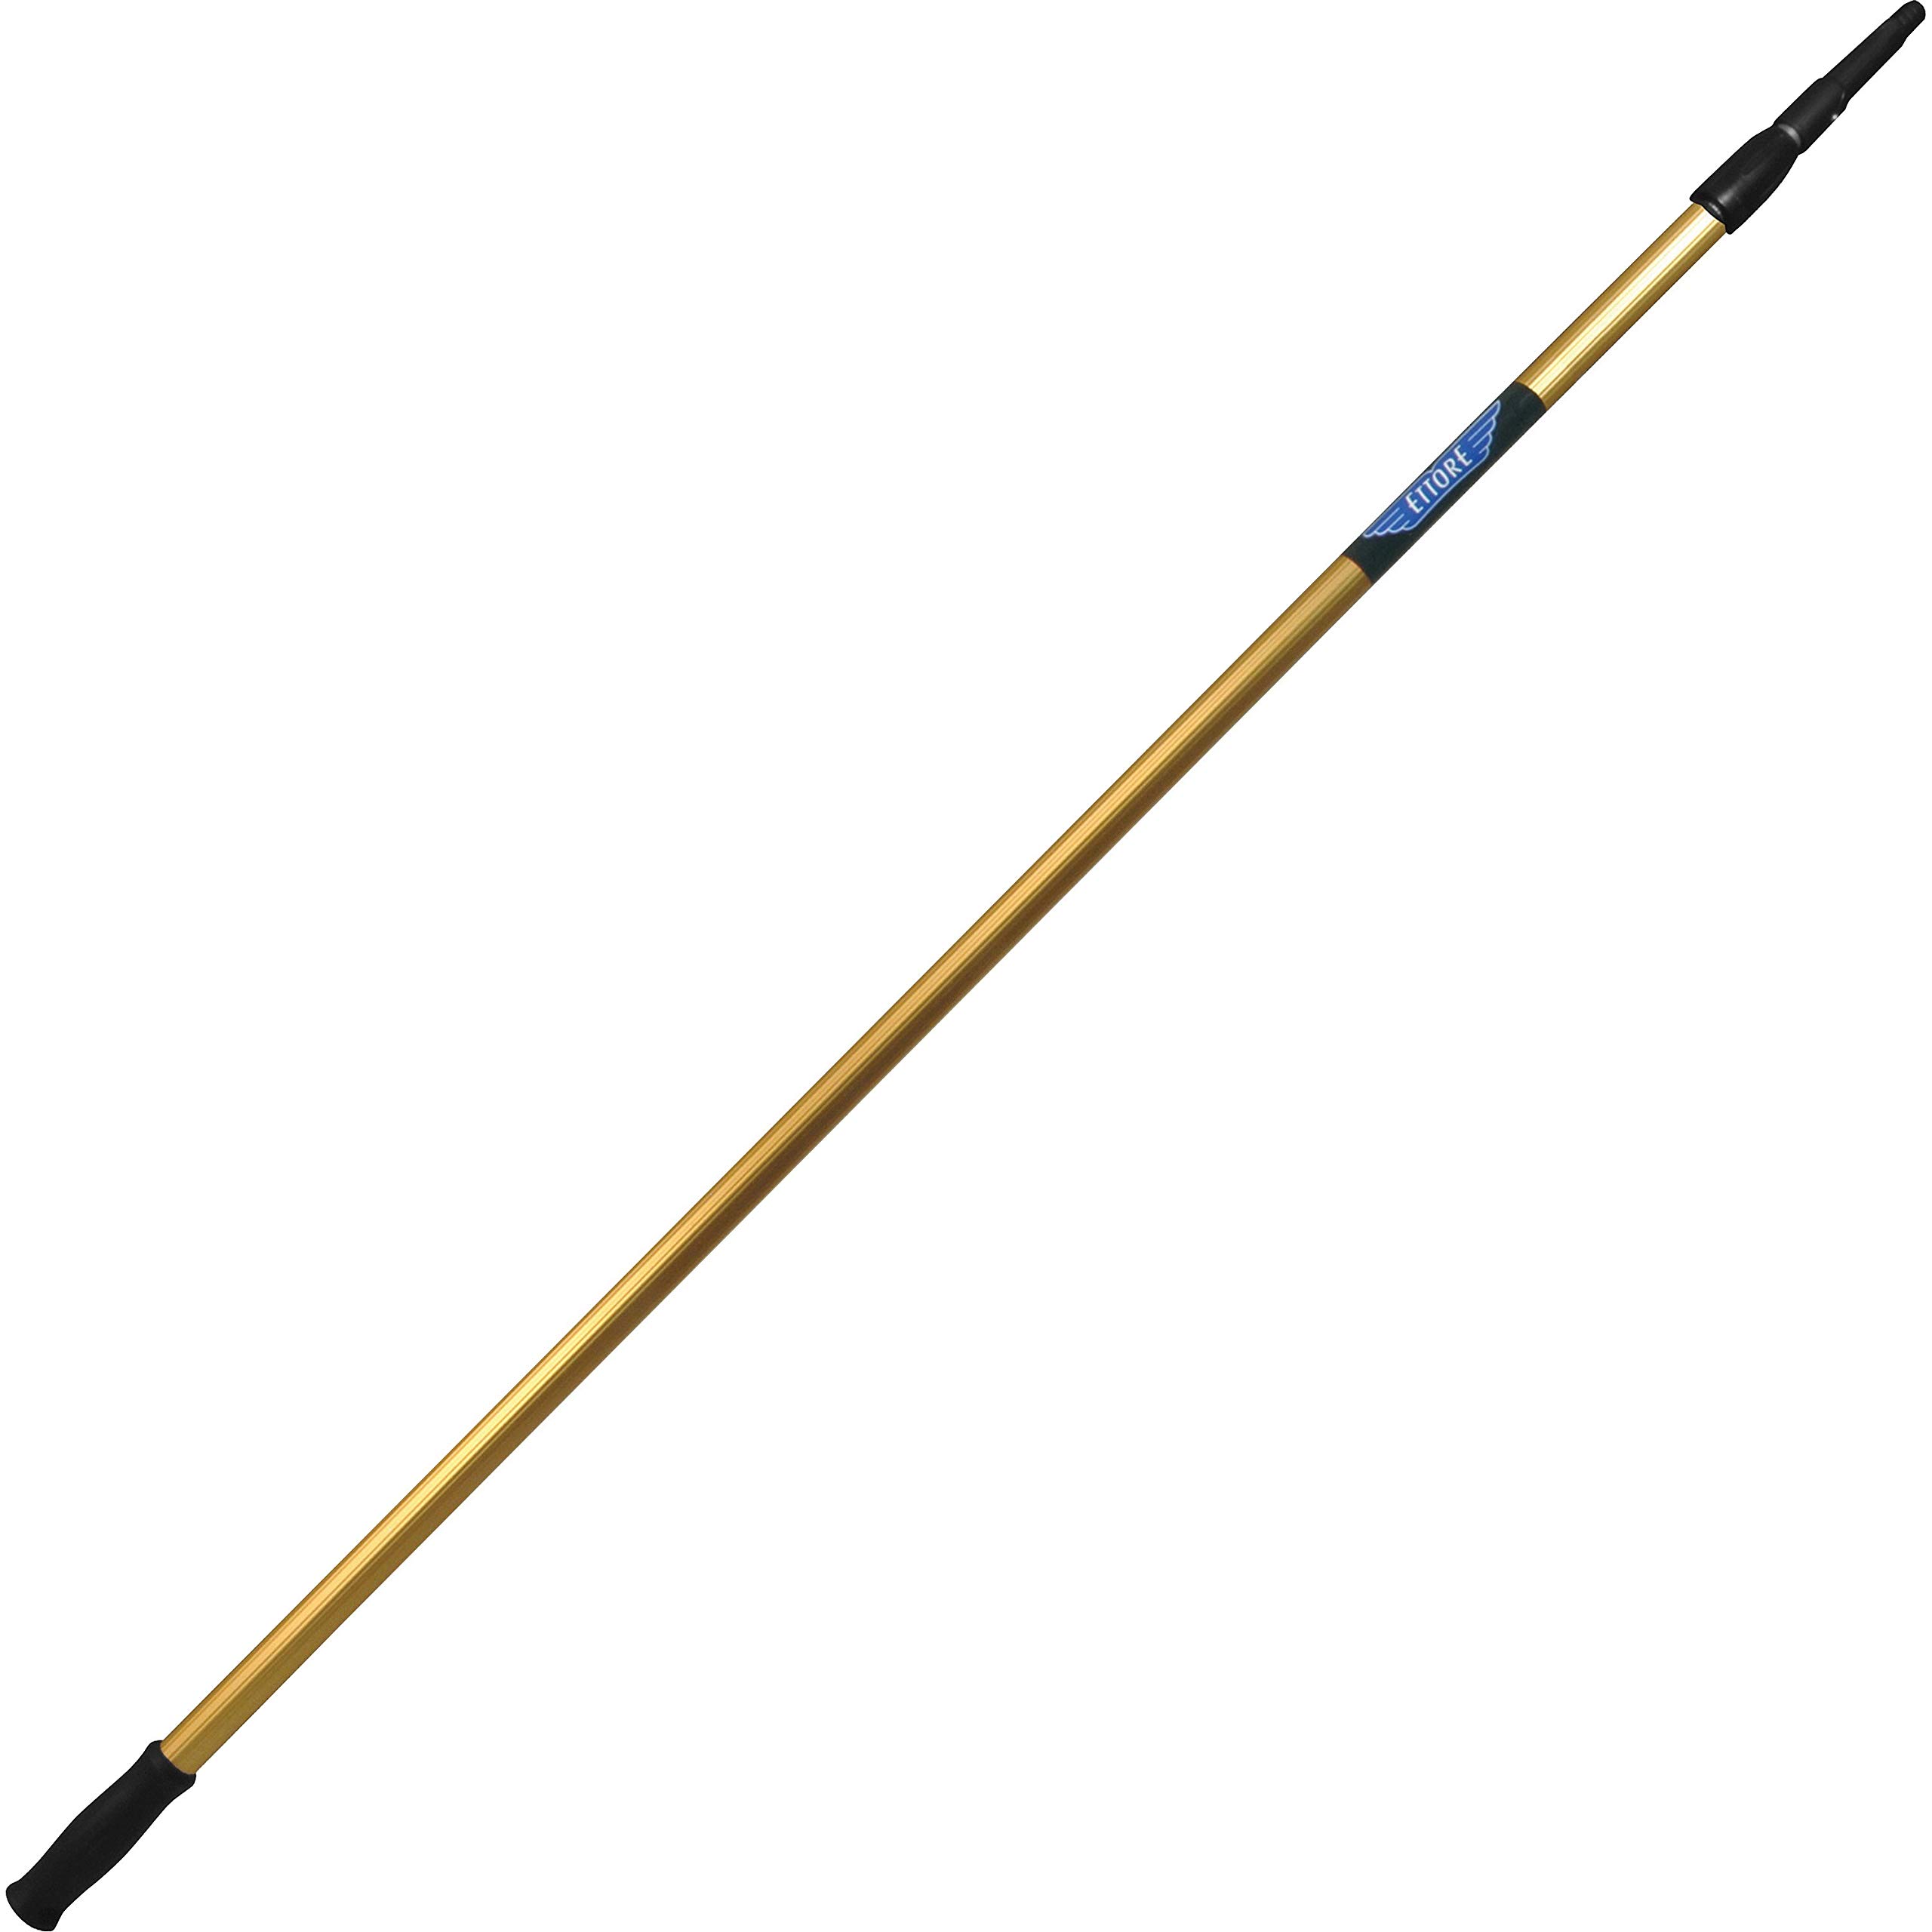 Ettore 42108 2 Section Extension Pole, 8-Feet,gold, Black